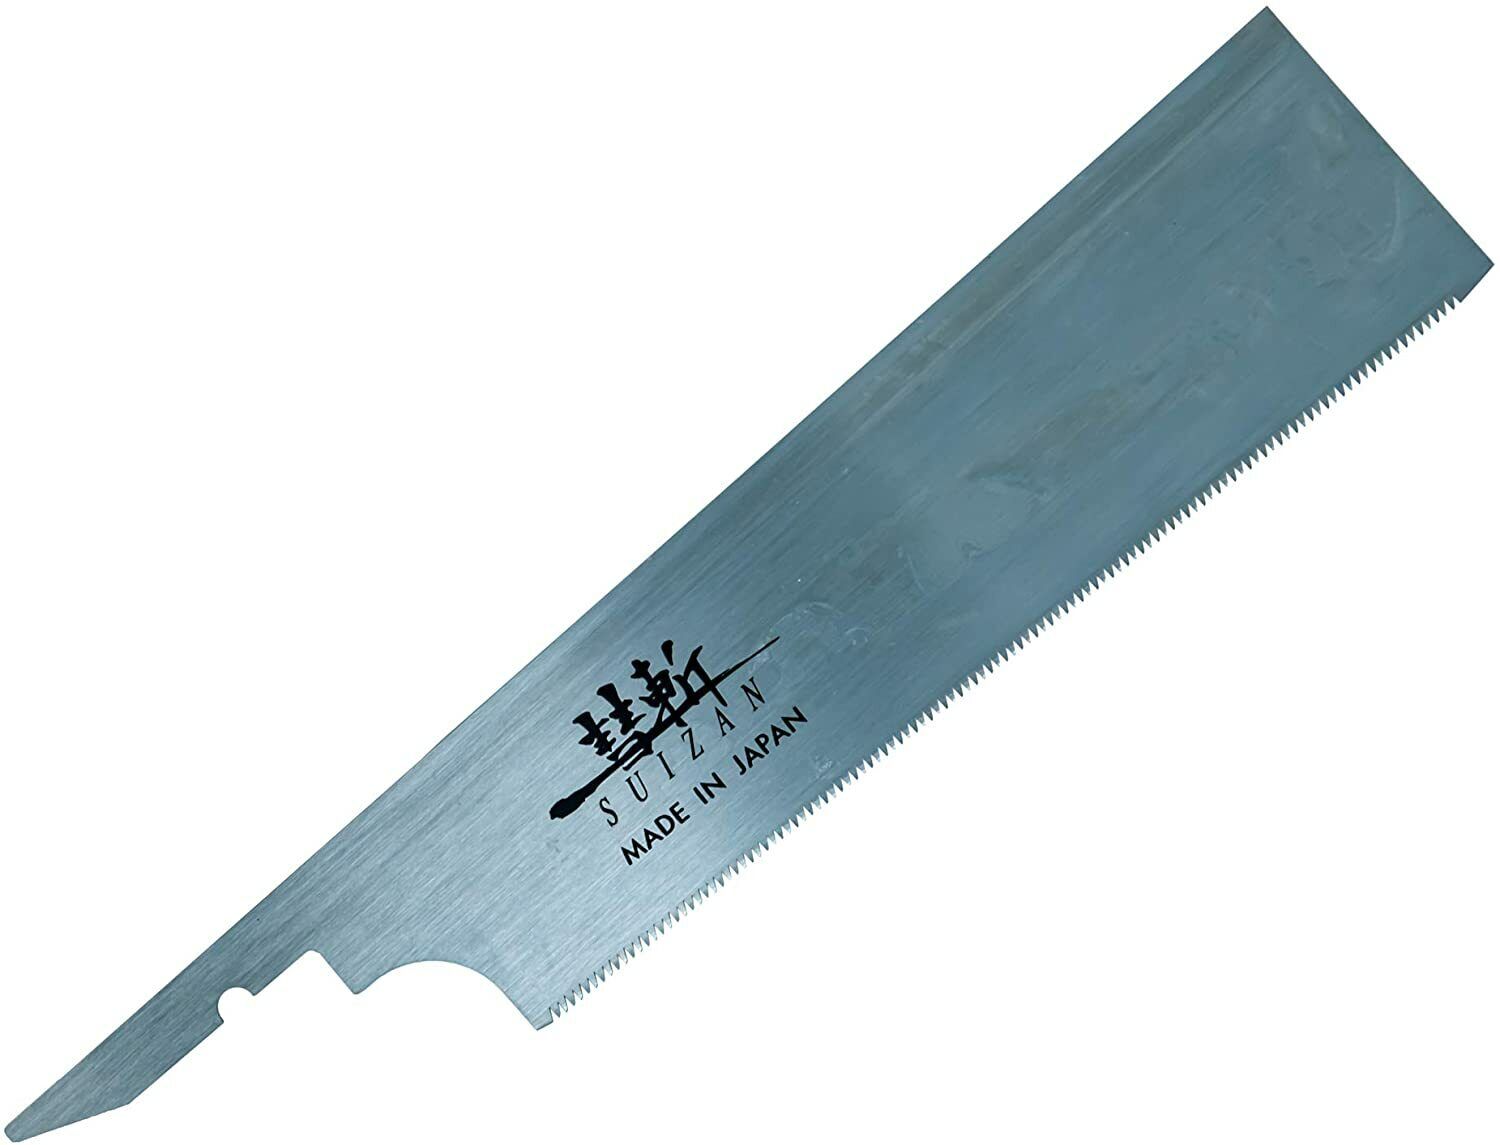 SUIZAN Japanese Dozuki Dovetail Hand Saw 7 Inch Pull Saw, Replac